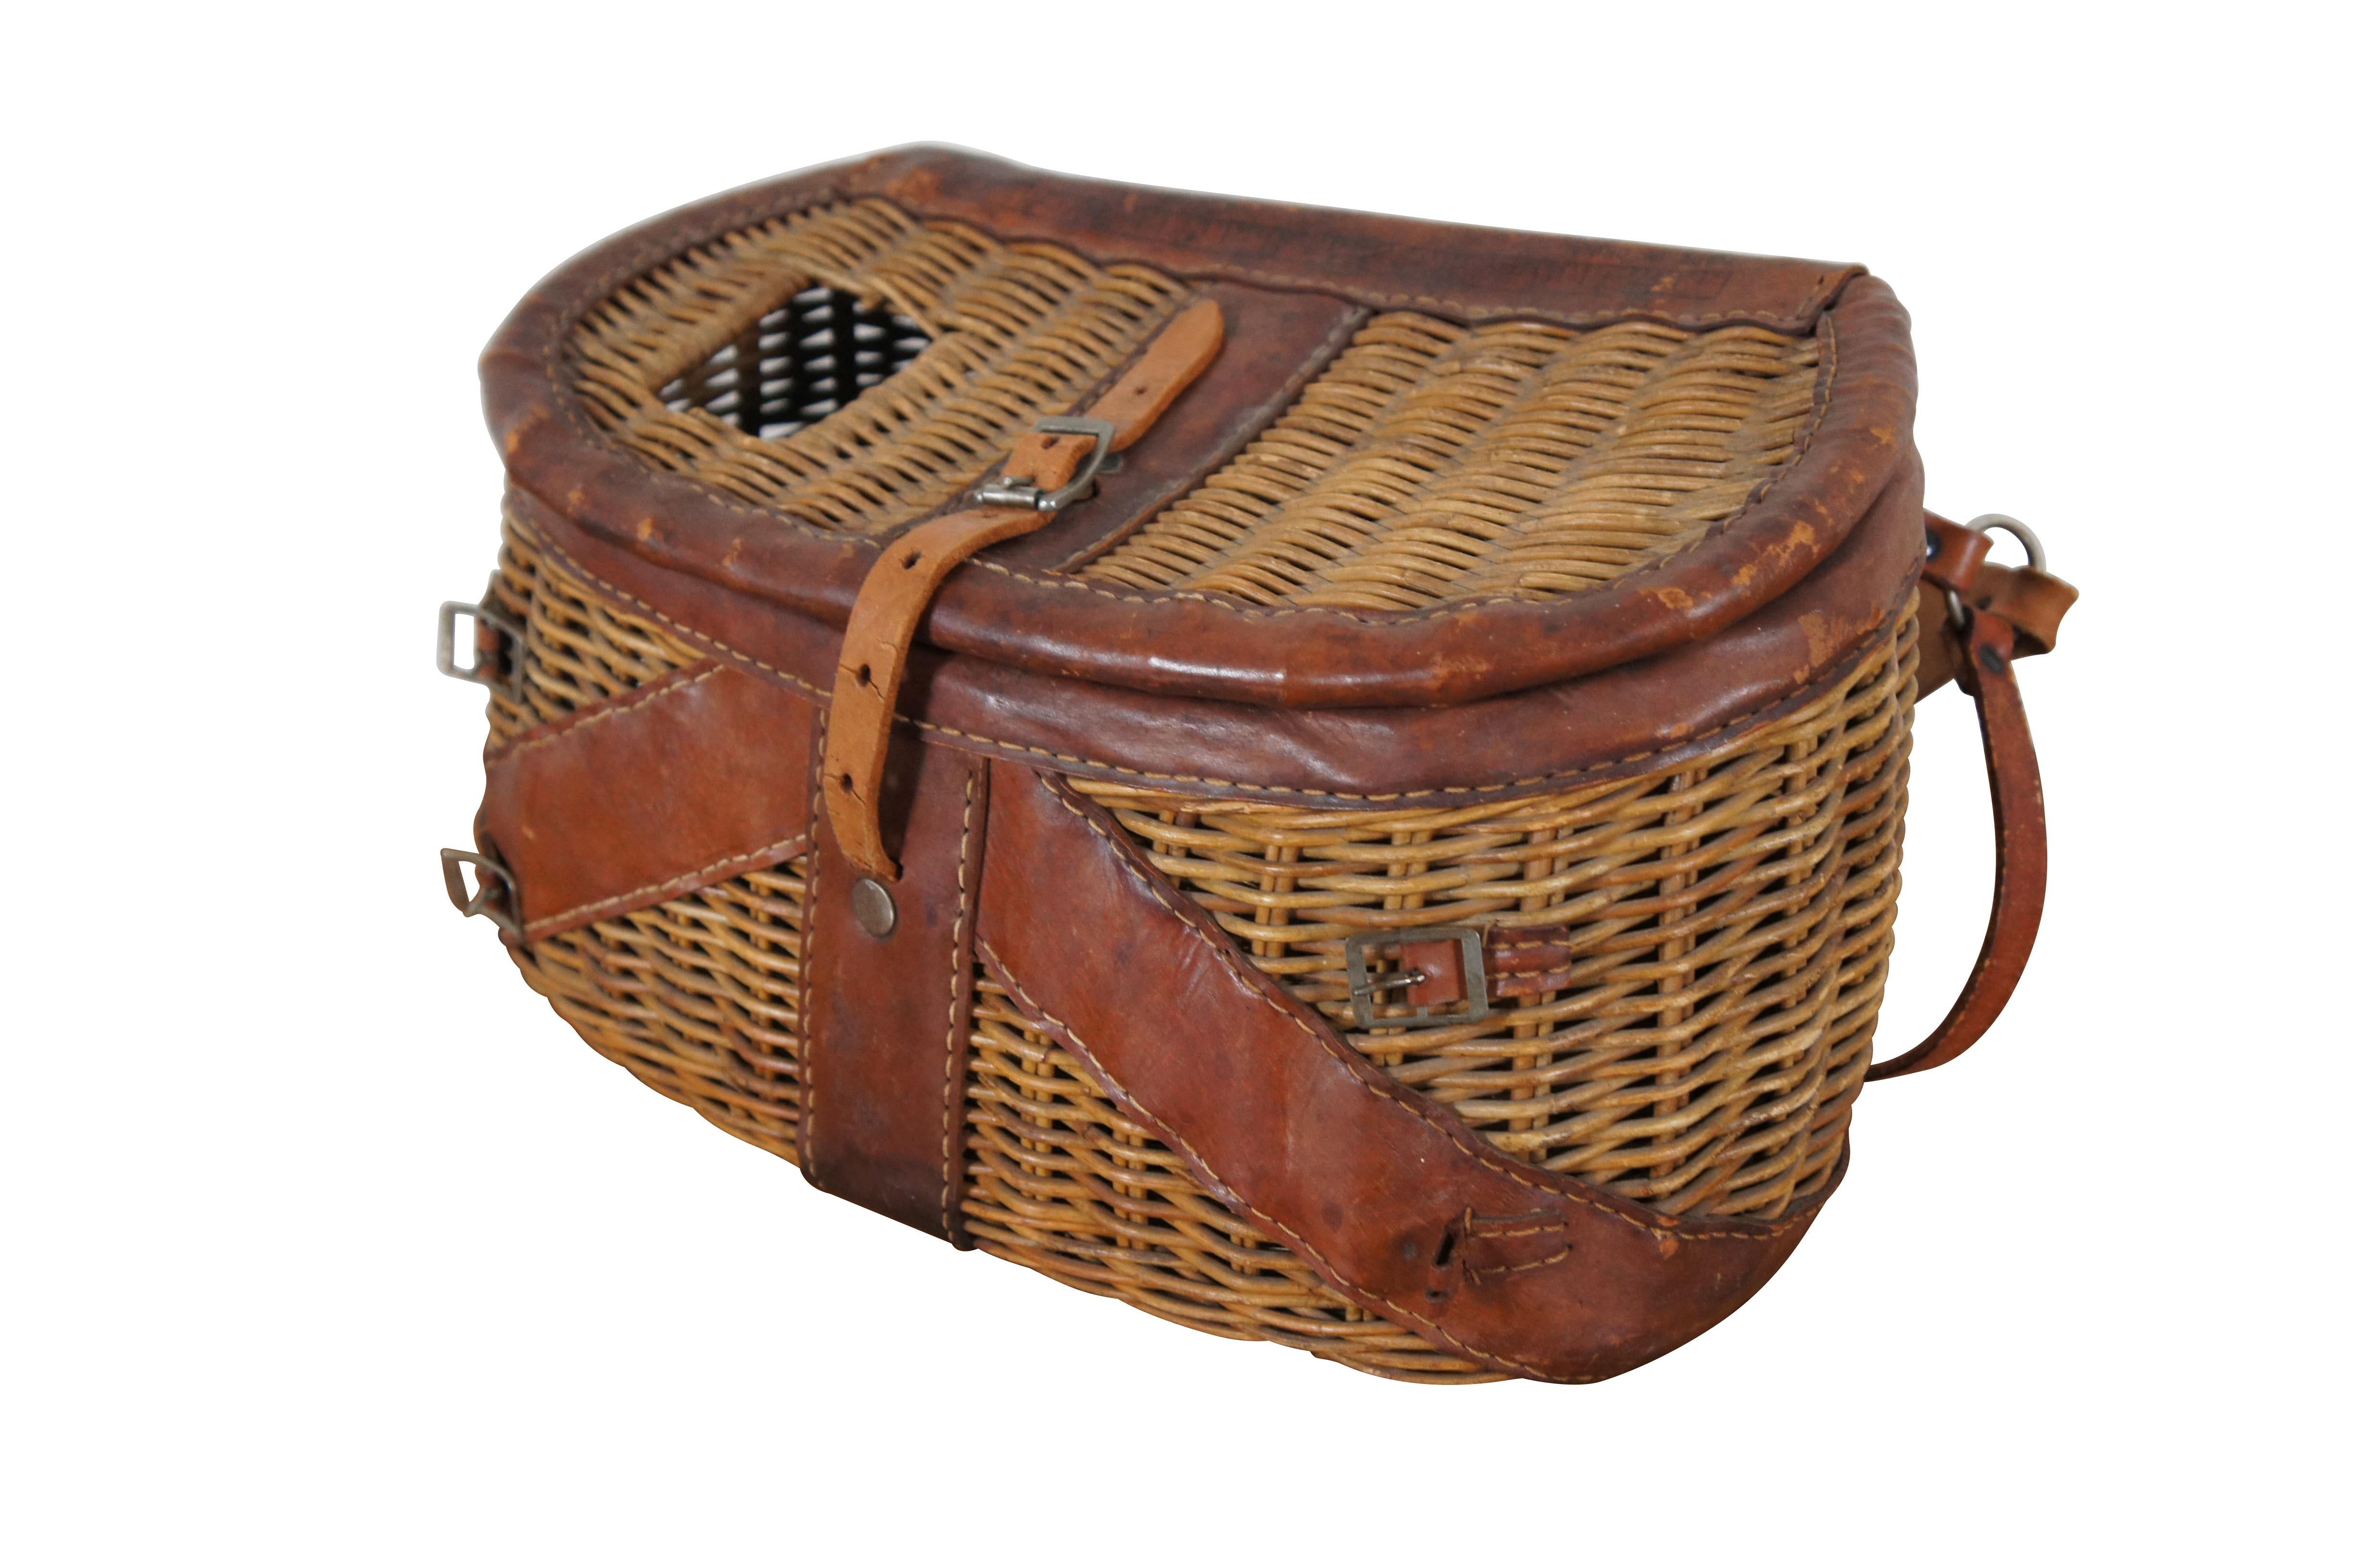 Montana fly fishing vintage creel, circa 1930-1940's. The creel features a tightly woven wicker, leather wrapped rims to the lids, support for the shoulder strap, and a buckle and strap closure.  Made in China

Dimensions:
14.5” x 8” x 8” (Width x